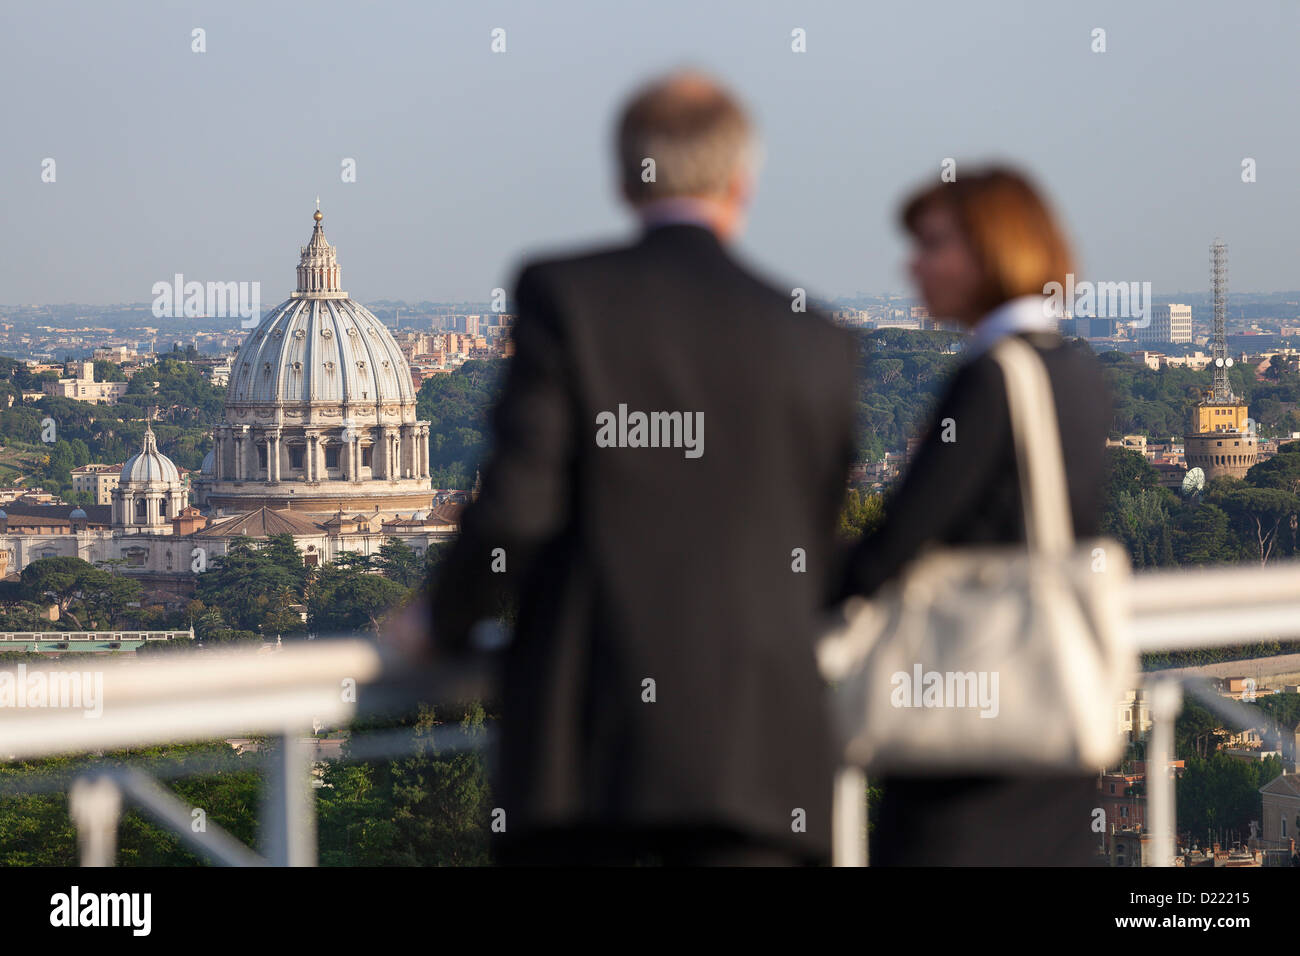 Visitors looking at Saint Peter's cathedral dome from above Stock Photo